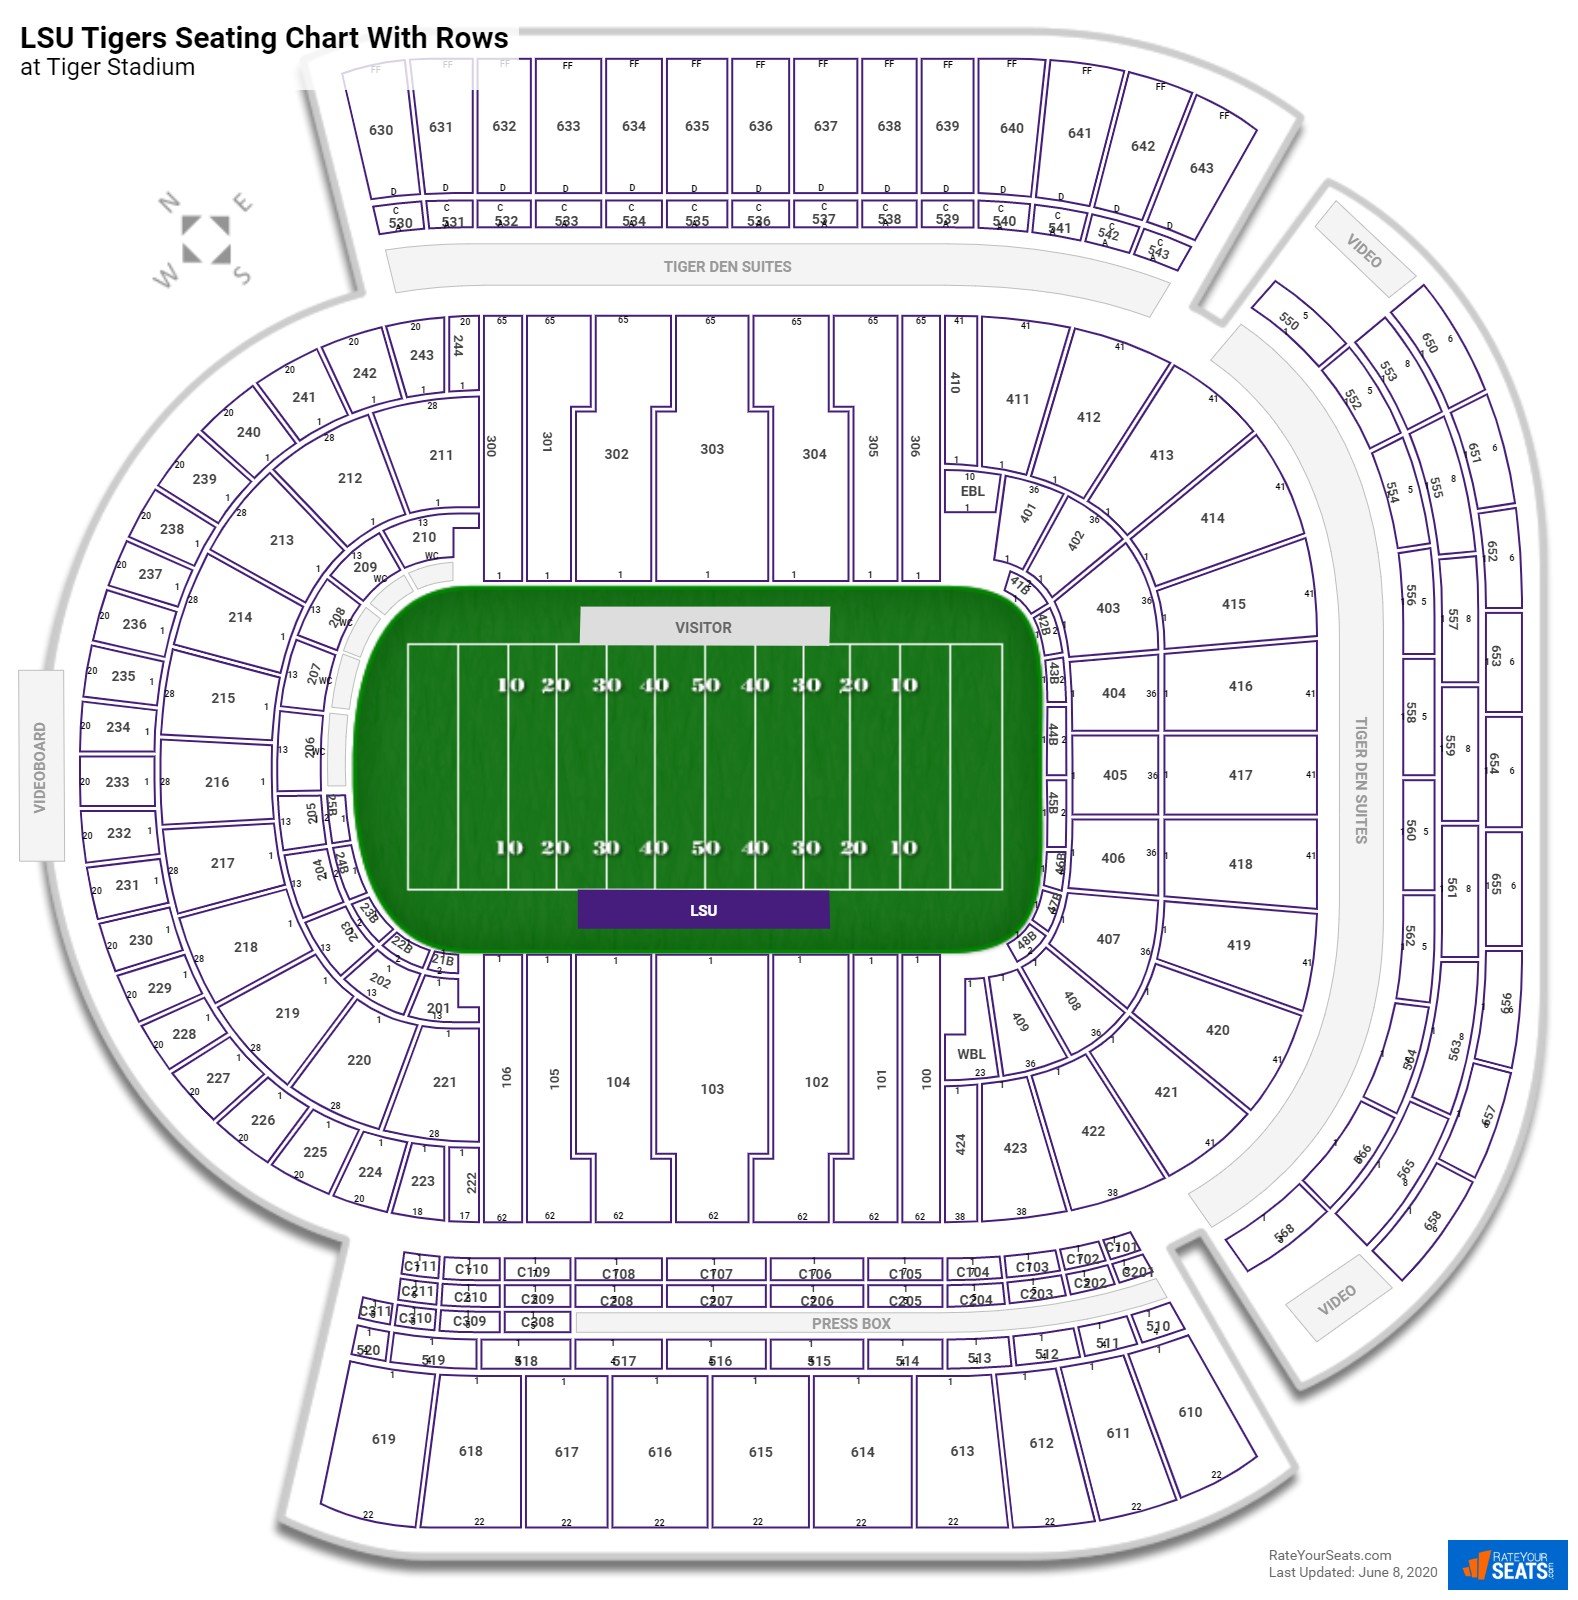 Tiger Stadium seating chart with row numbers